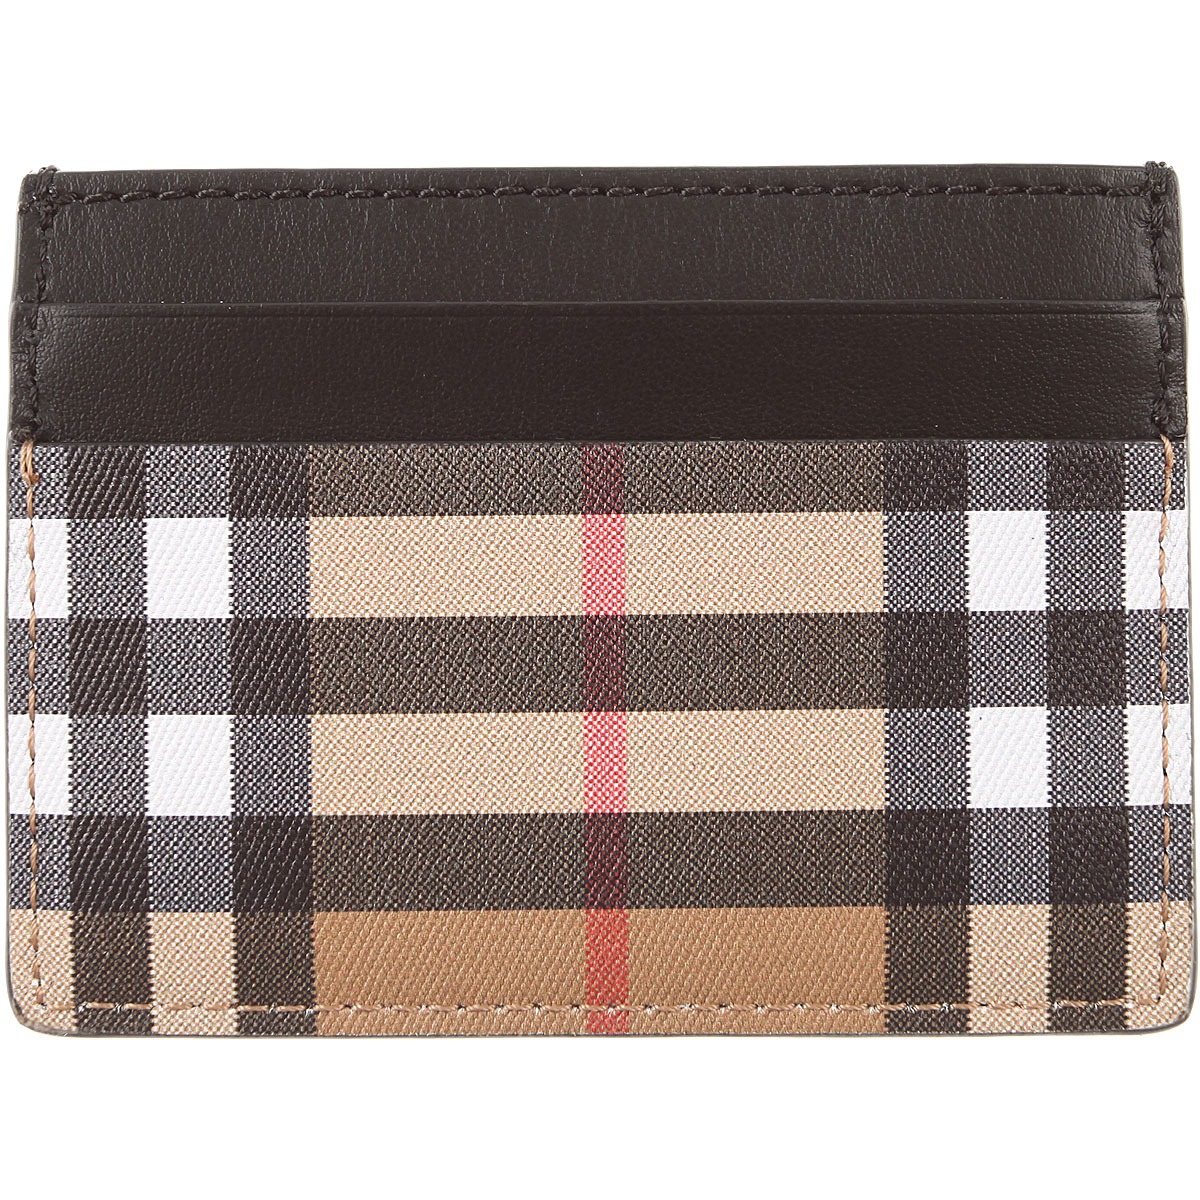 Mens Wallets Burberry, Style code: 4074637-00100-